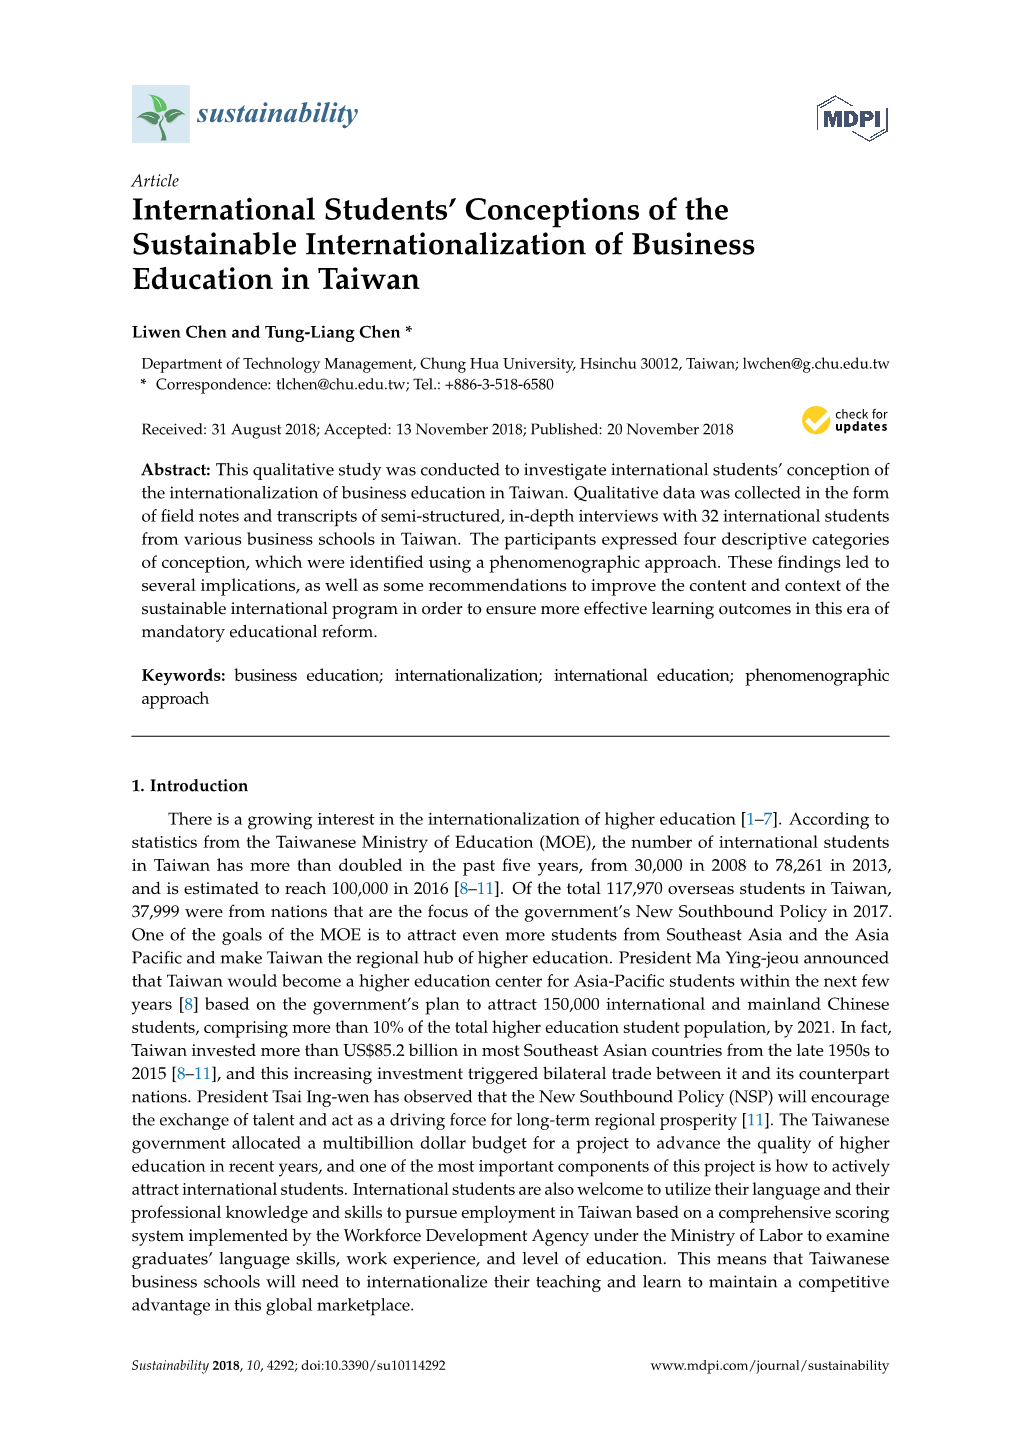 International Students' Conceptions of the Sustainable Internationalization